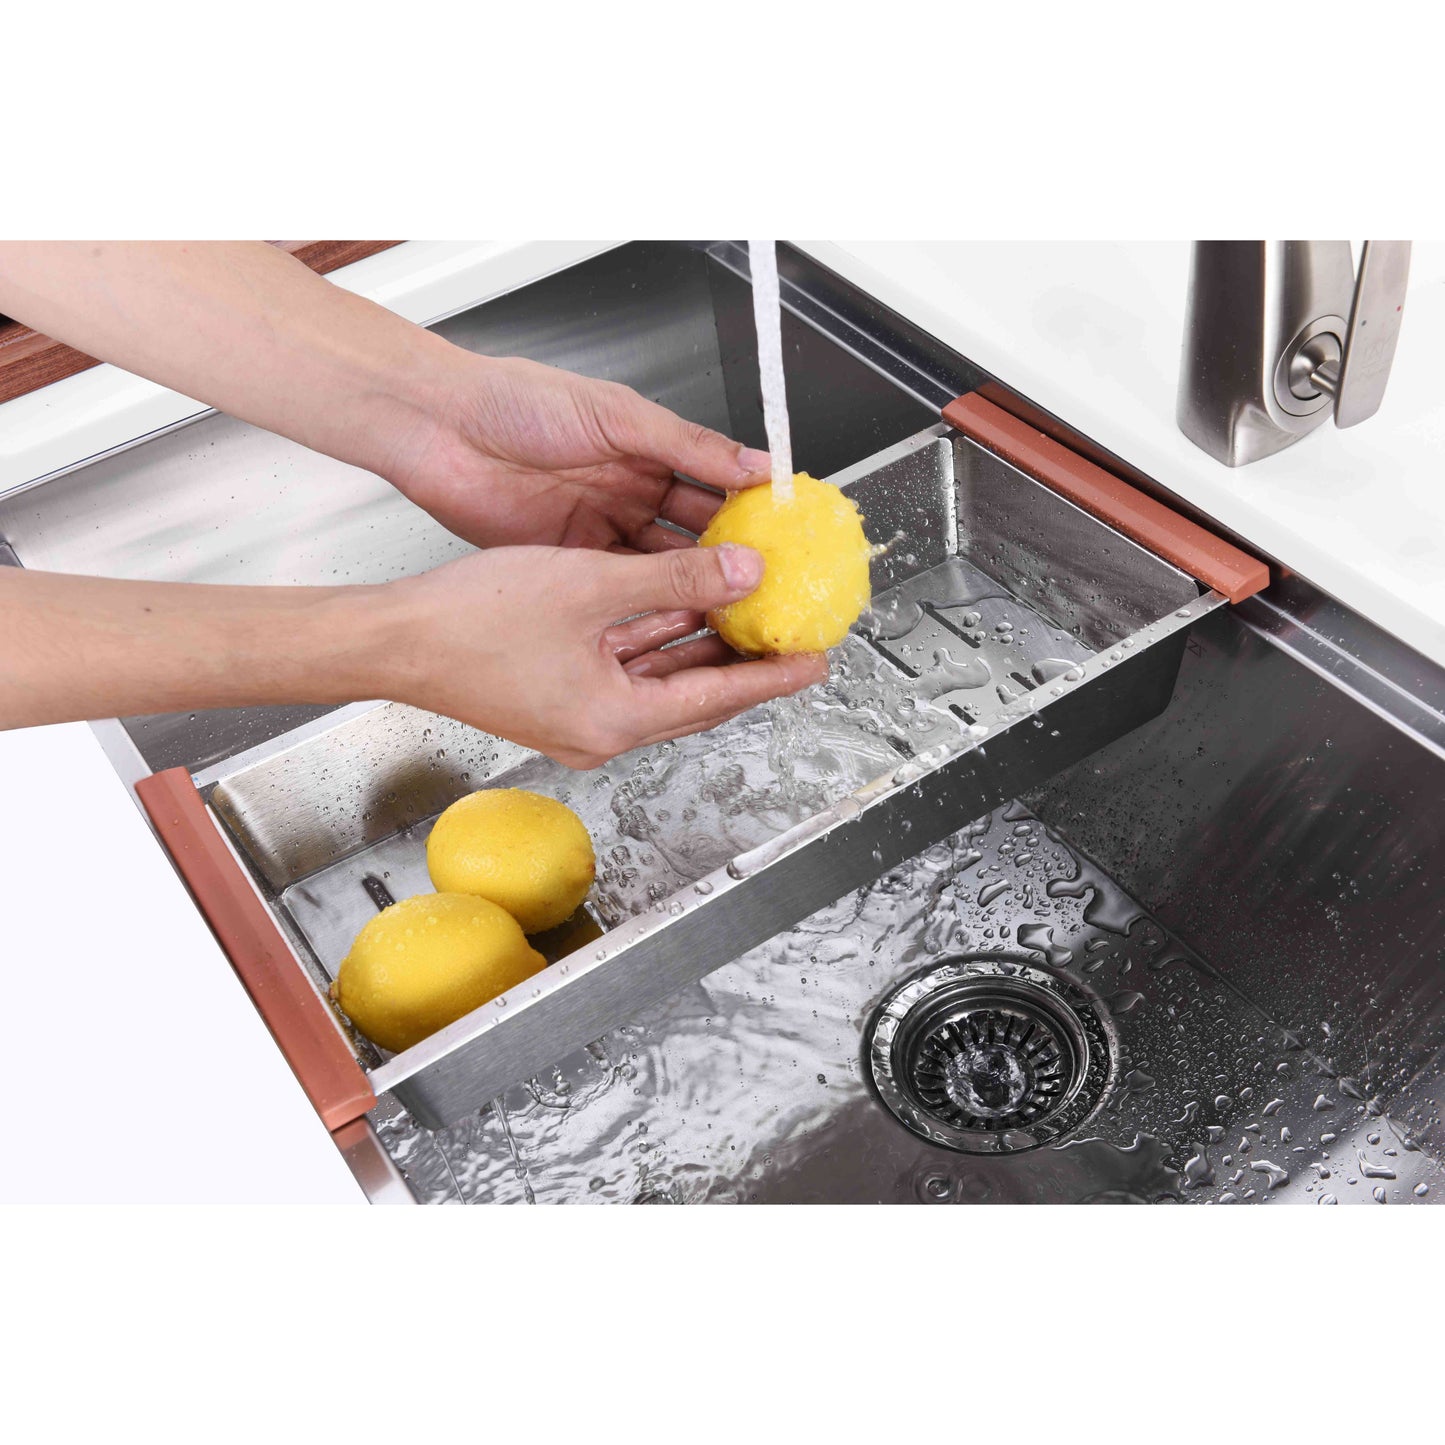 ANZZI Aegis Series 33" Single Basin Stainless Steel Undermount Kitchen Sink With Cutting Board and Colander